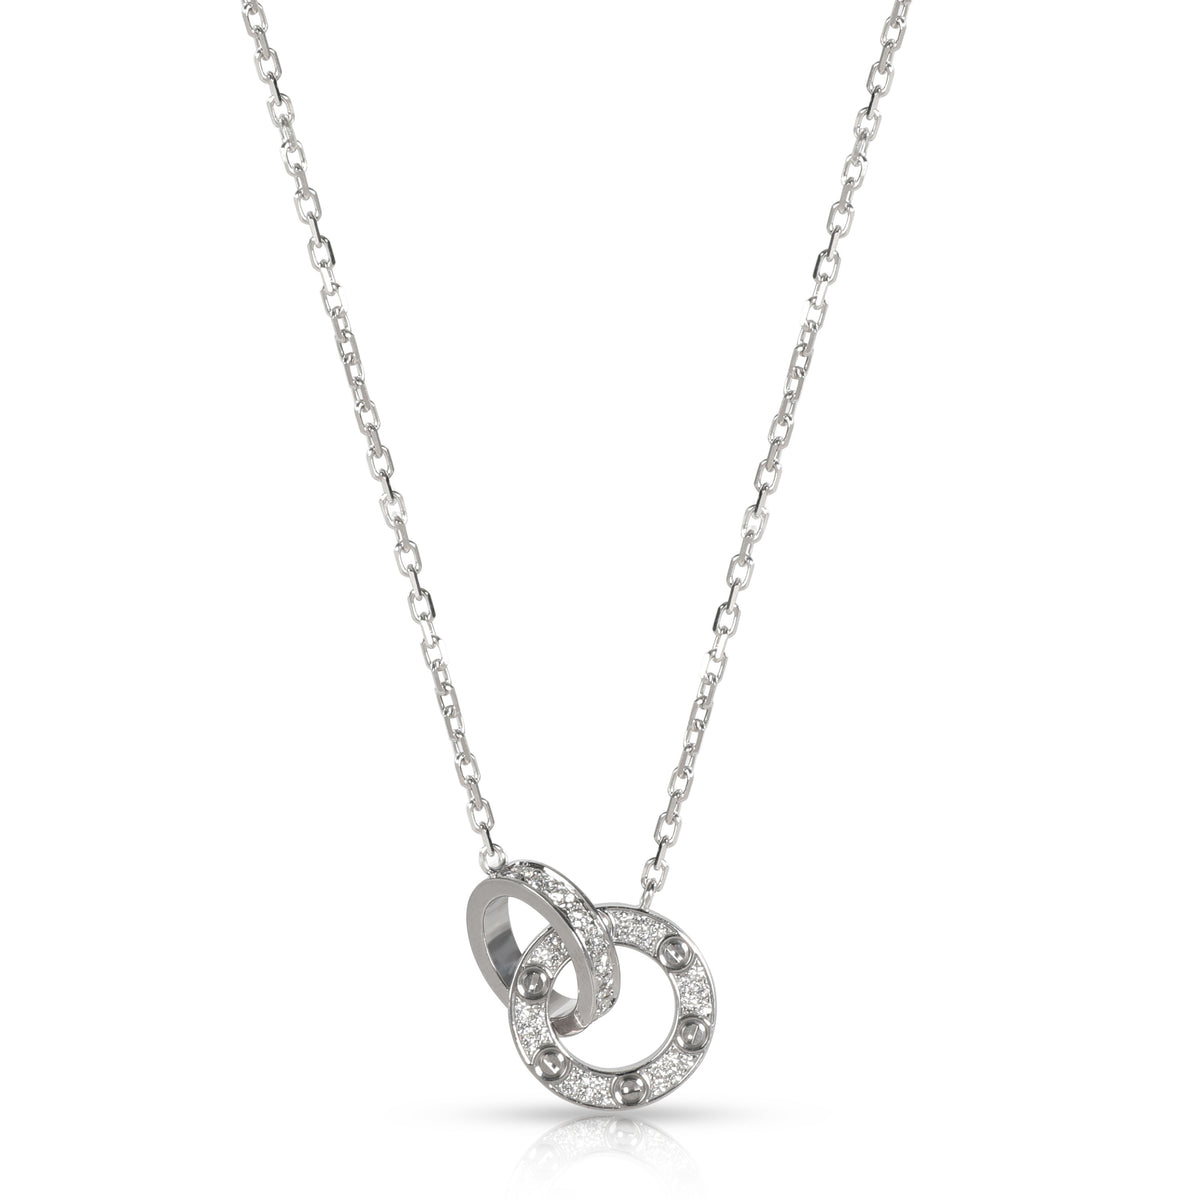 Cartier Love Diamond Necklace in 18K White Gold 0.30 CTW